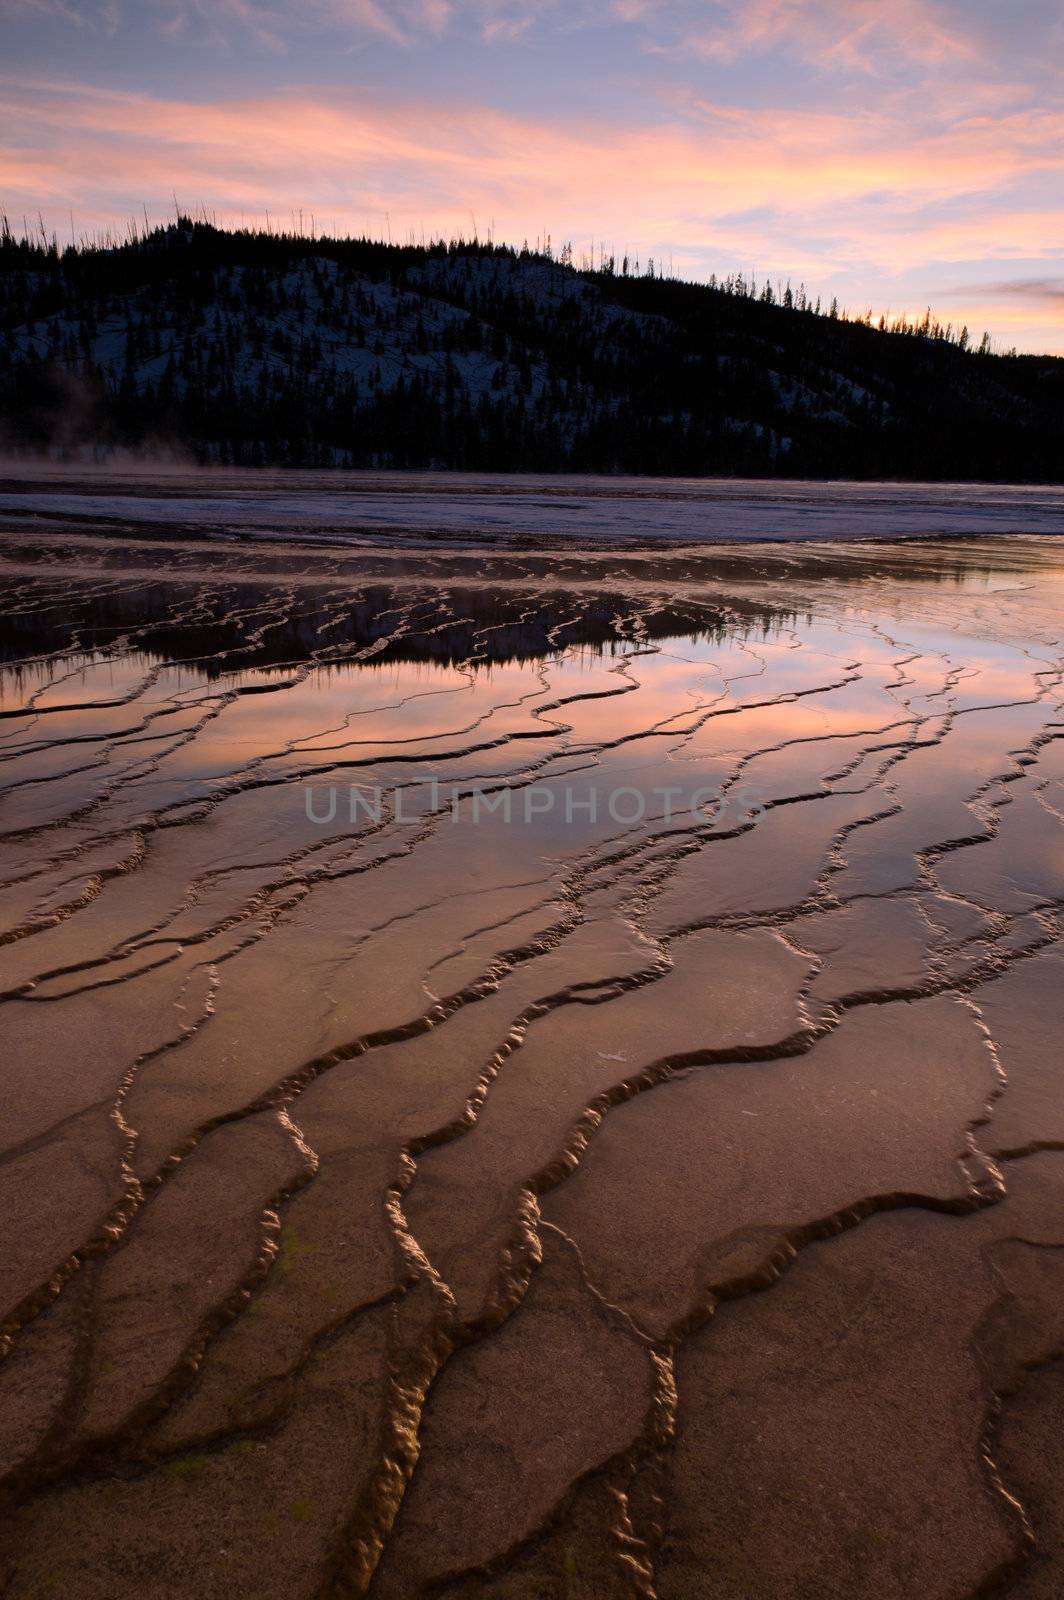 Geyserite patterns and a forested ridge at sunset, Grand Prismatic Spring, Yellowstone National Park, Wyoming, USA